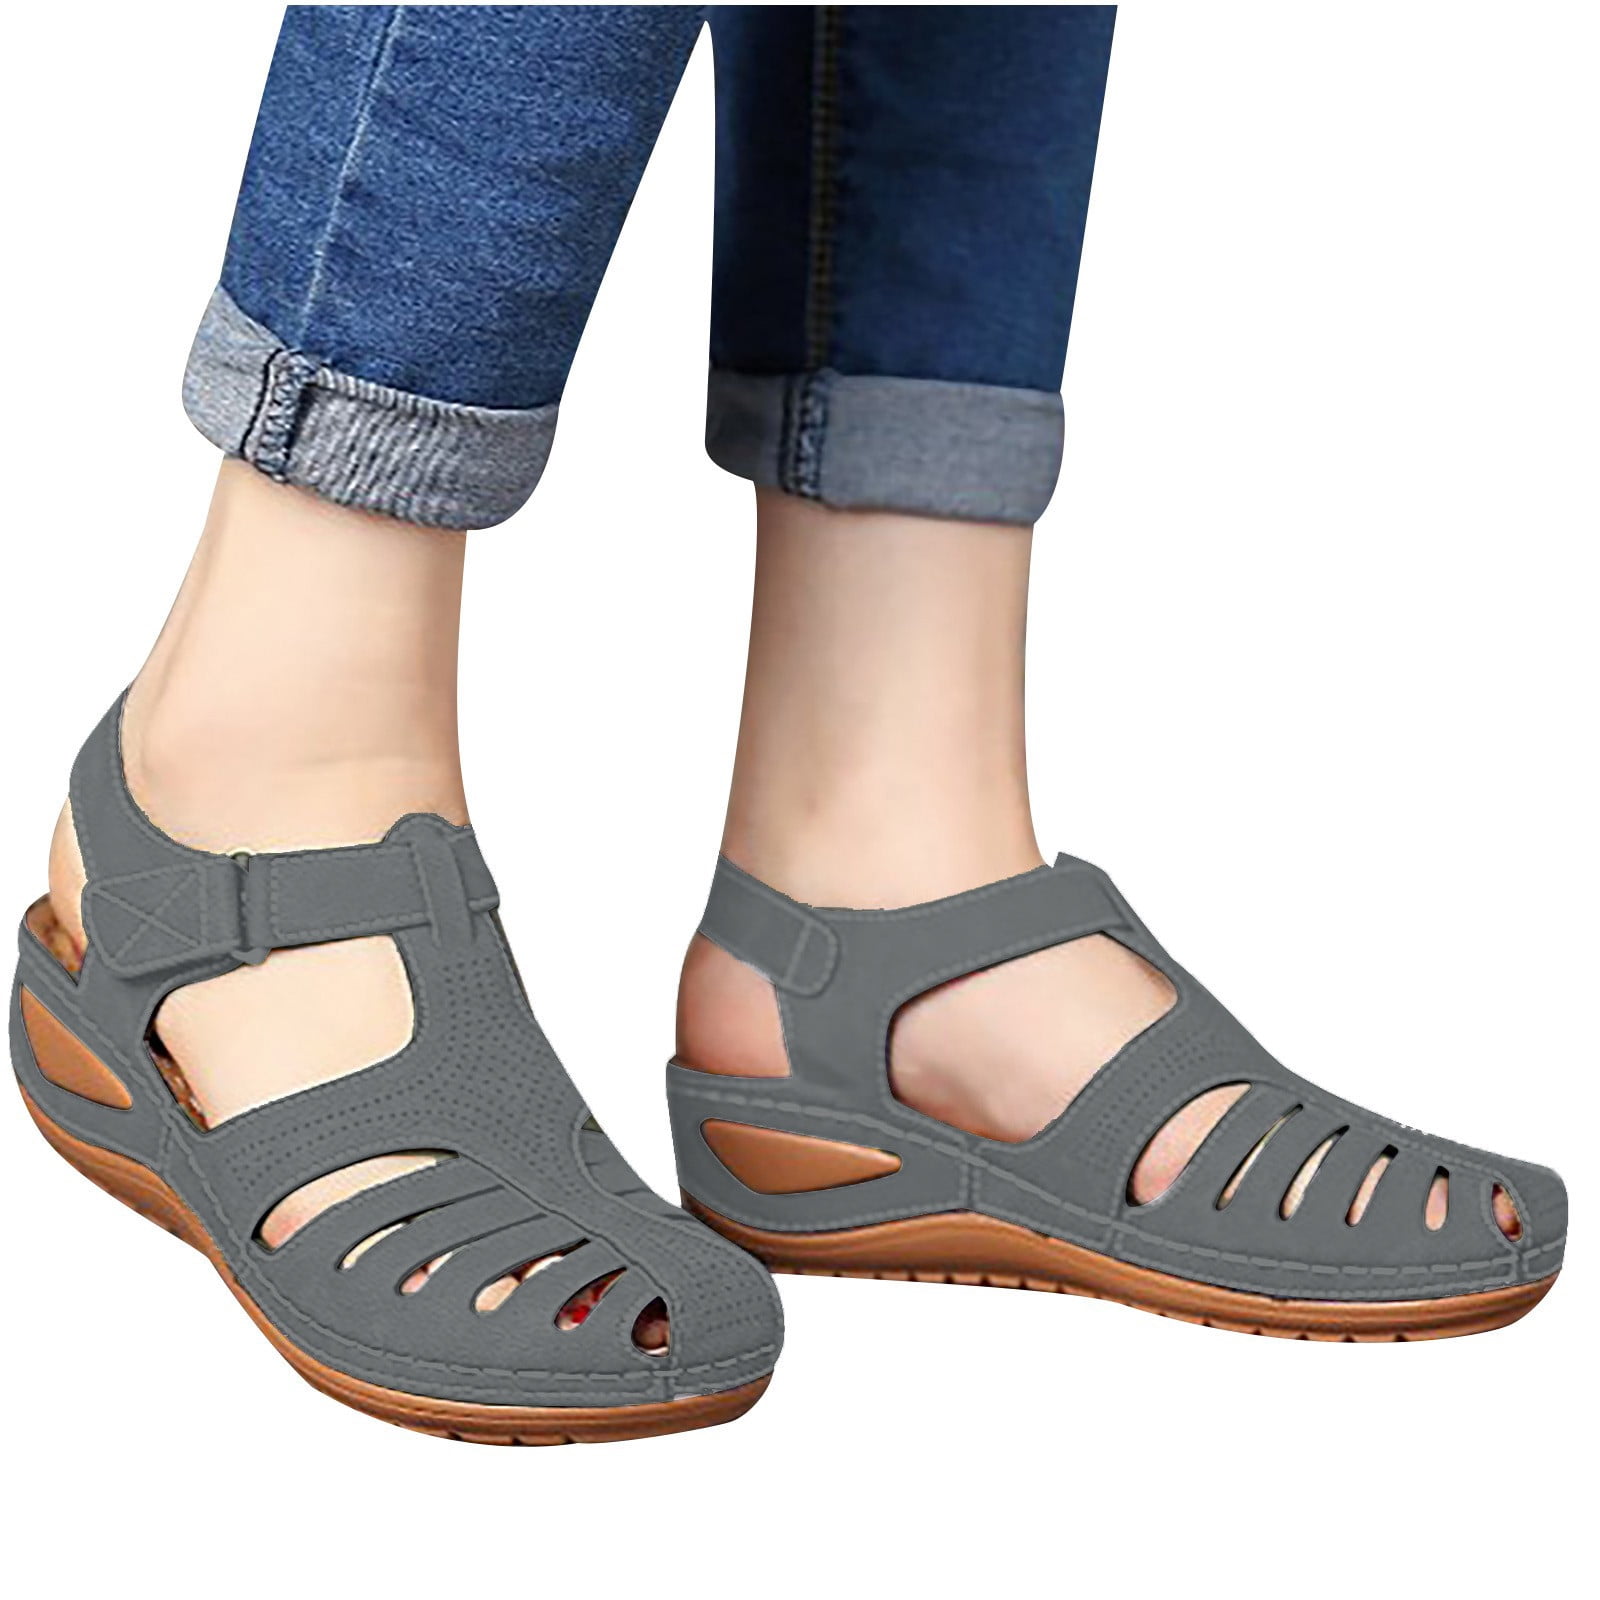 Arch Support Wedges for Women Posh Gladiator Closed Toe Platform ...